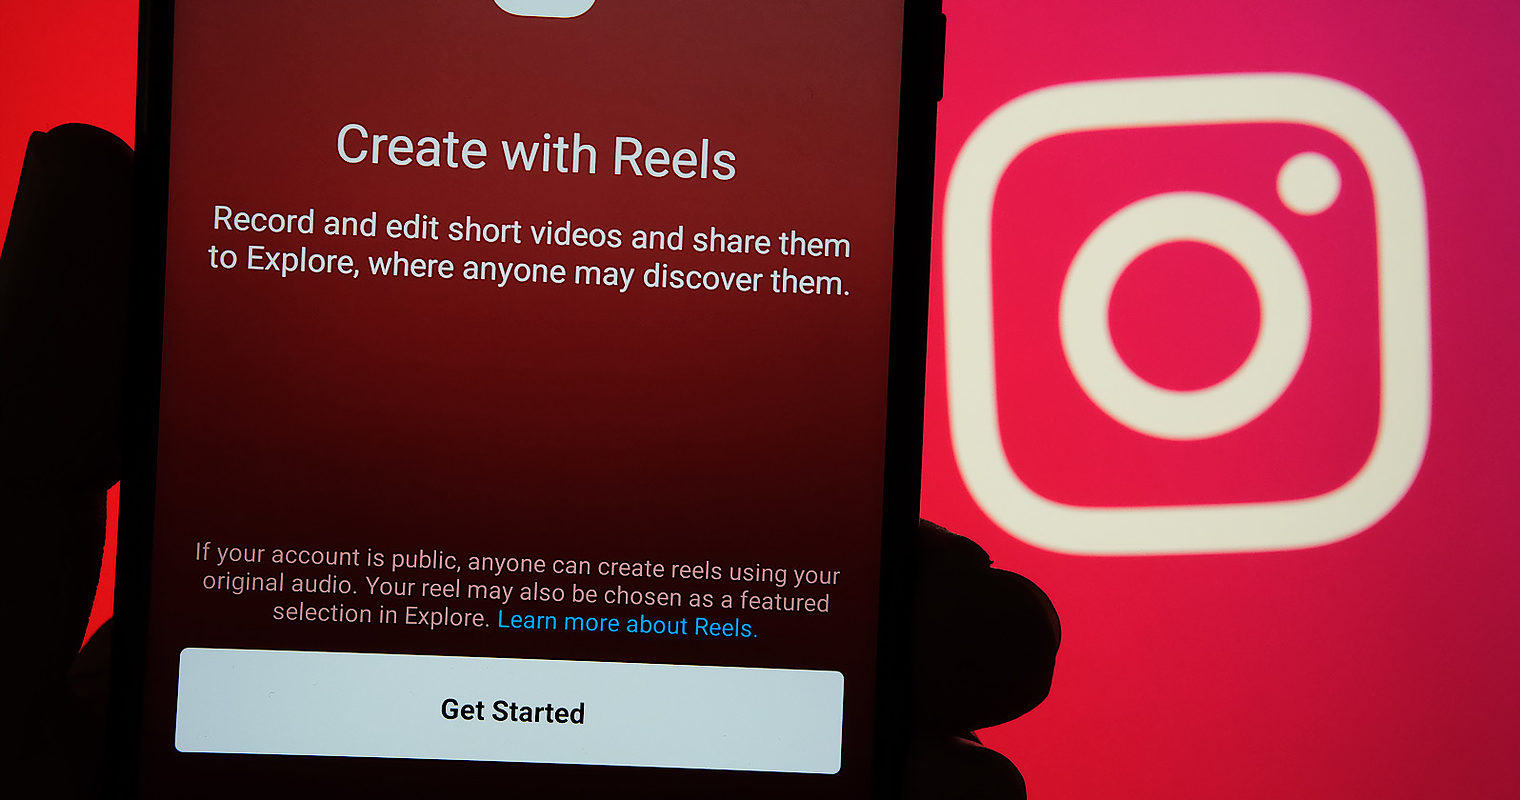 New Instagram Reels Features Include Crossposting, Insights, + More